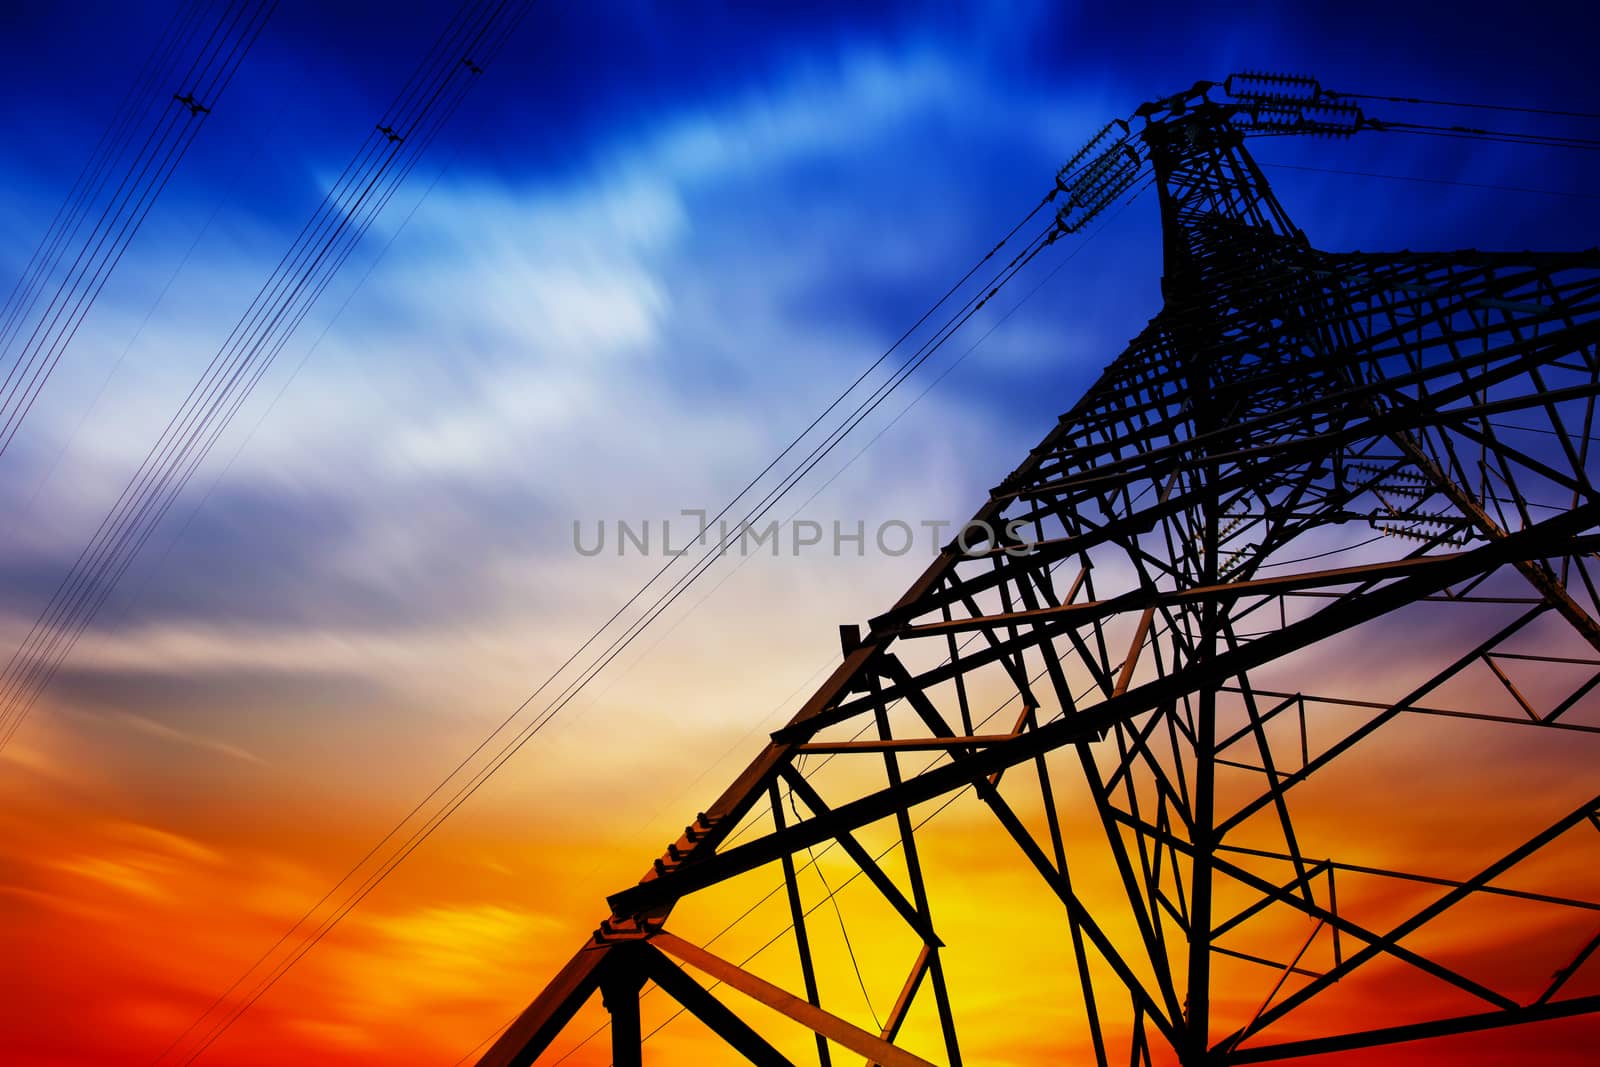 High voltage tower at sunset by long8614